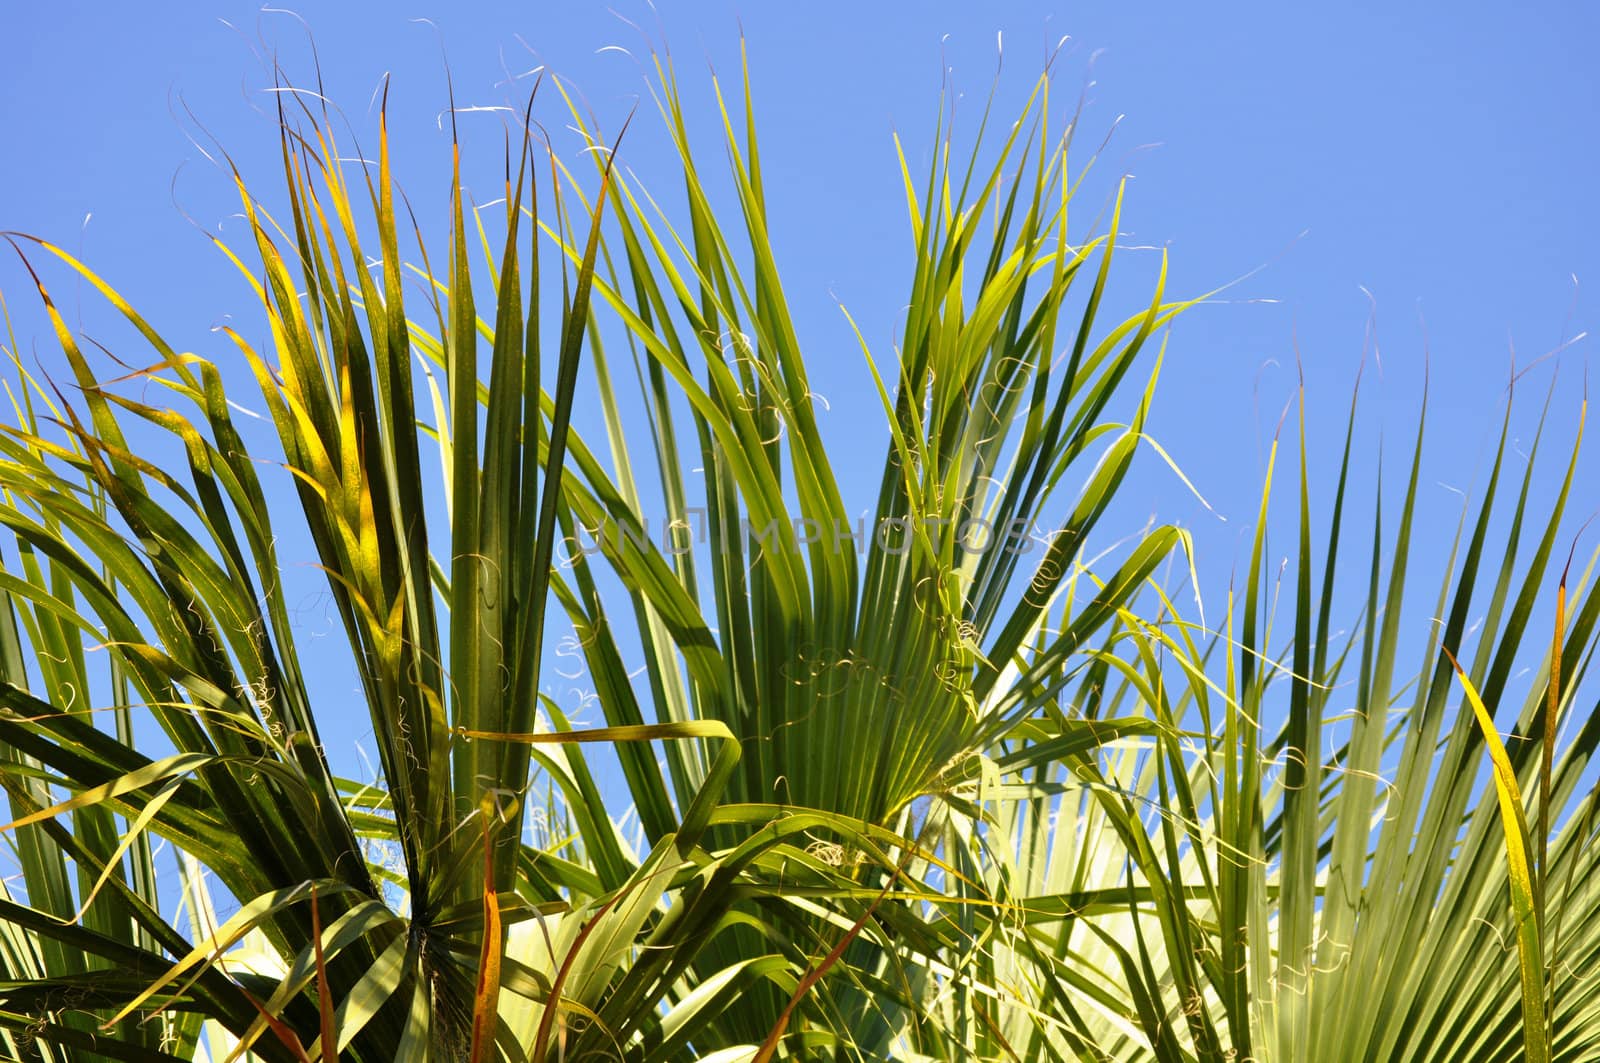 Blue sky through green fronds by RefocusPhoto